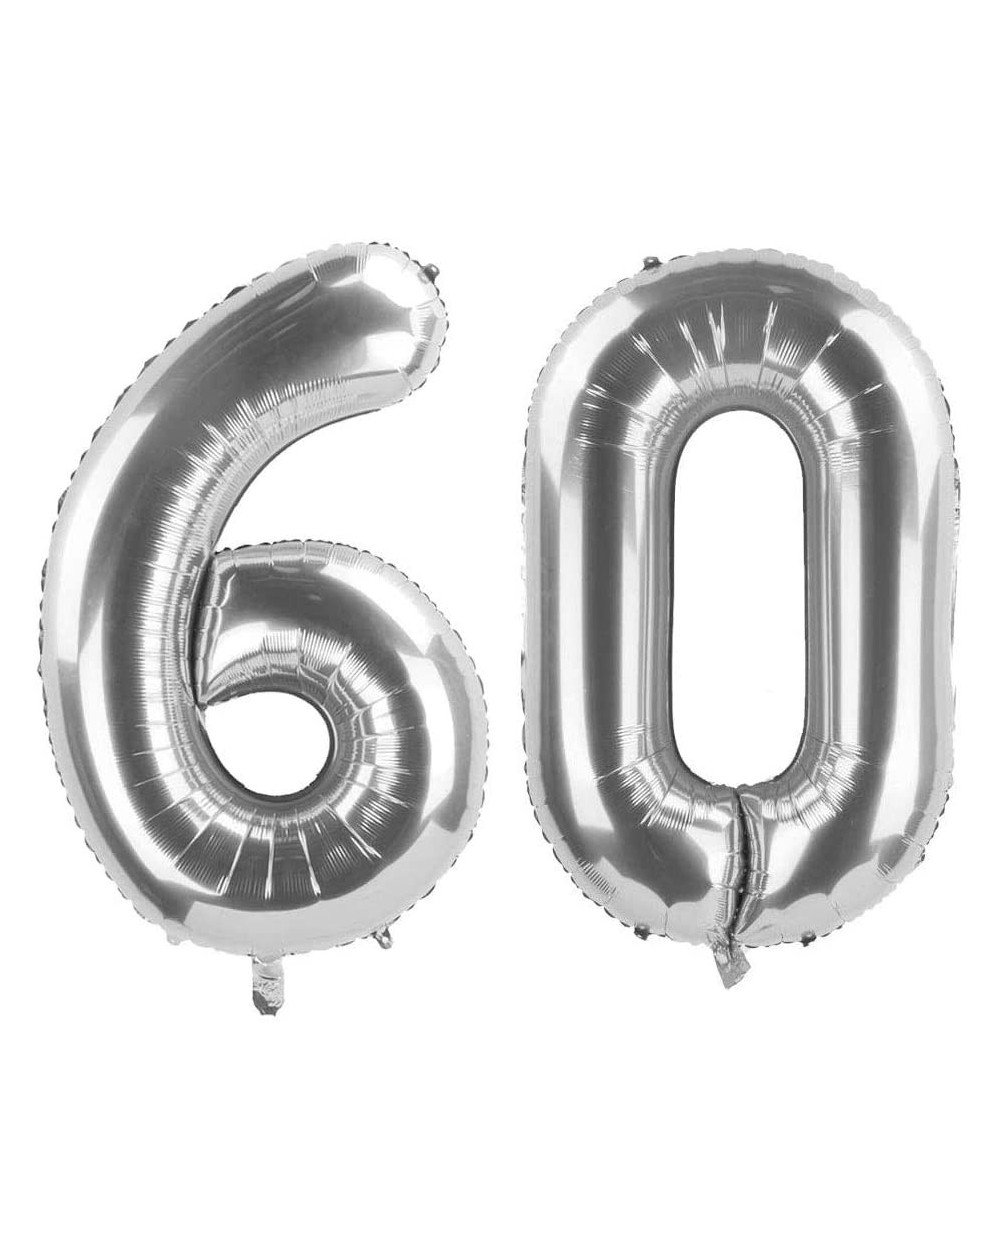 Balloons 40 Inch Silver Number 60 Balloons Mylar Foil Balloon for 60th Birthday Anniversary Decorations - Silver-60 - CL197TW...